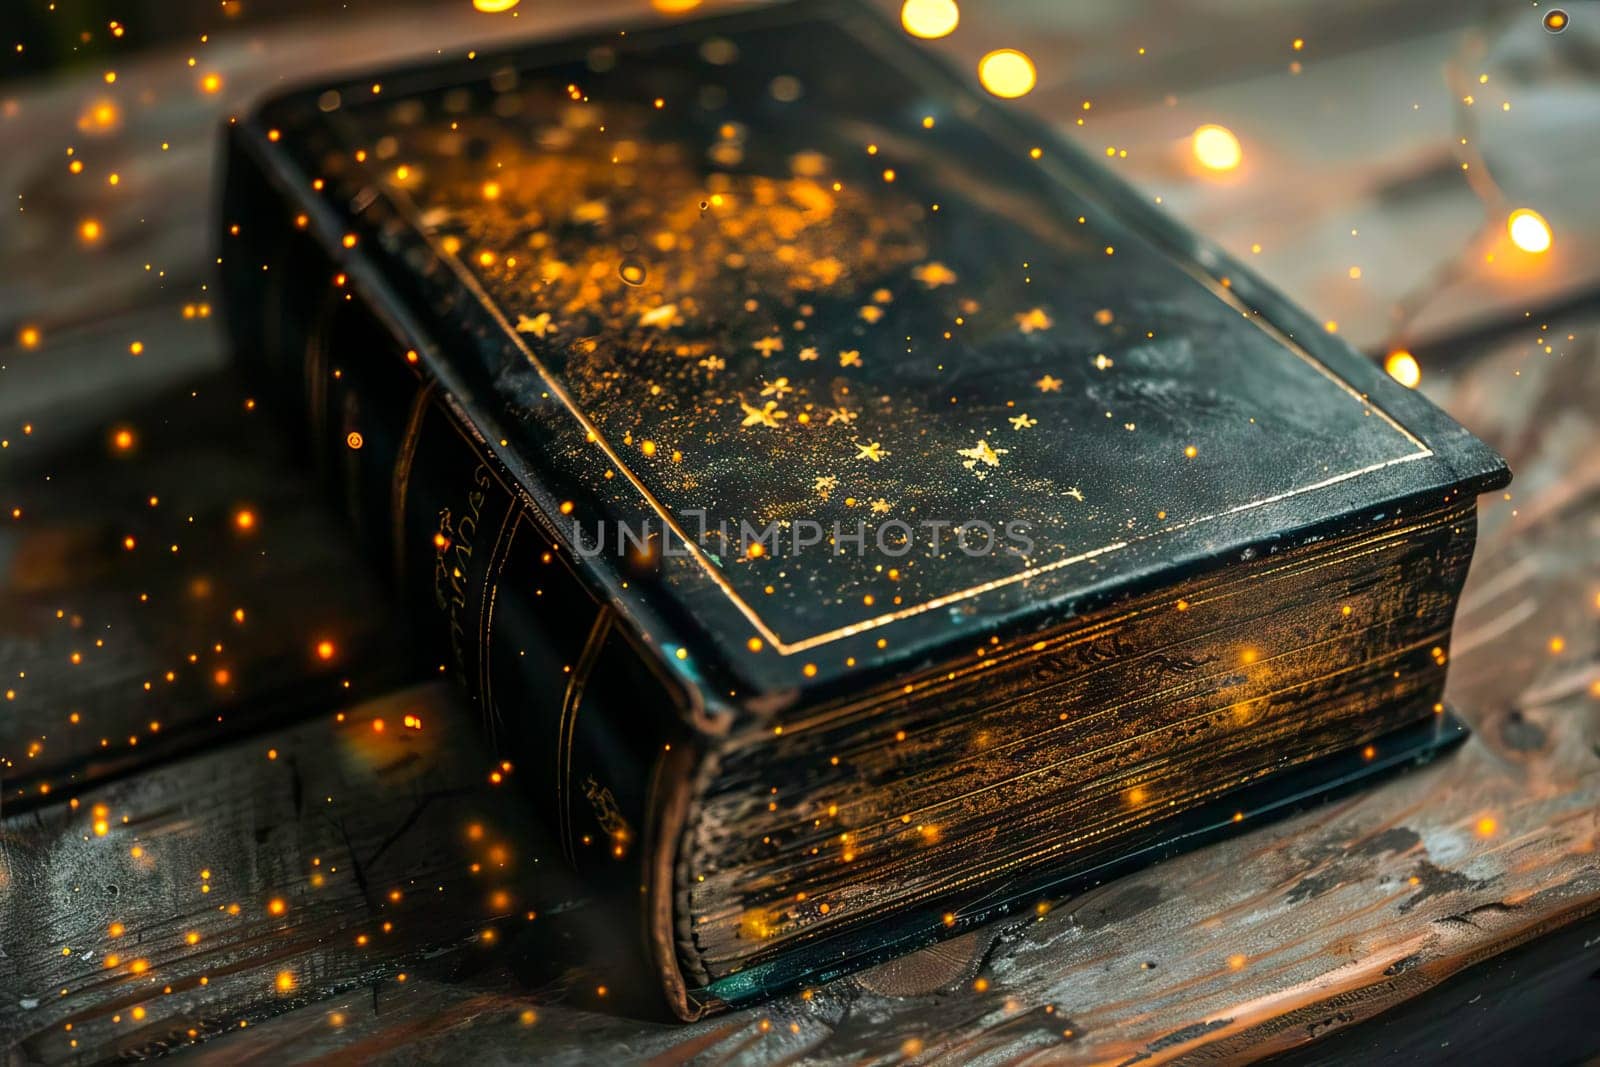 A book decorated with gold stars is placed on a table. by vladimka